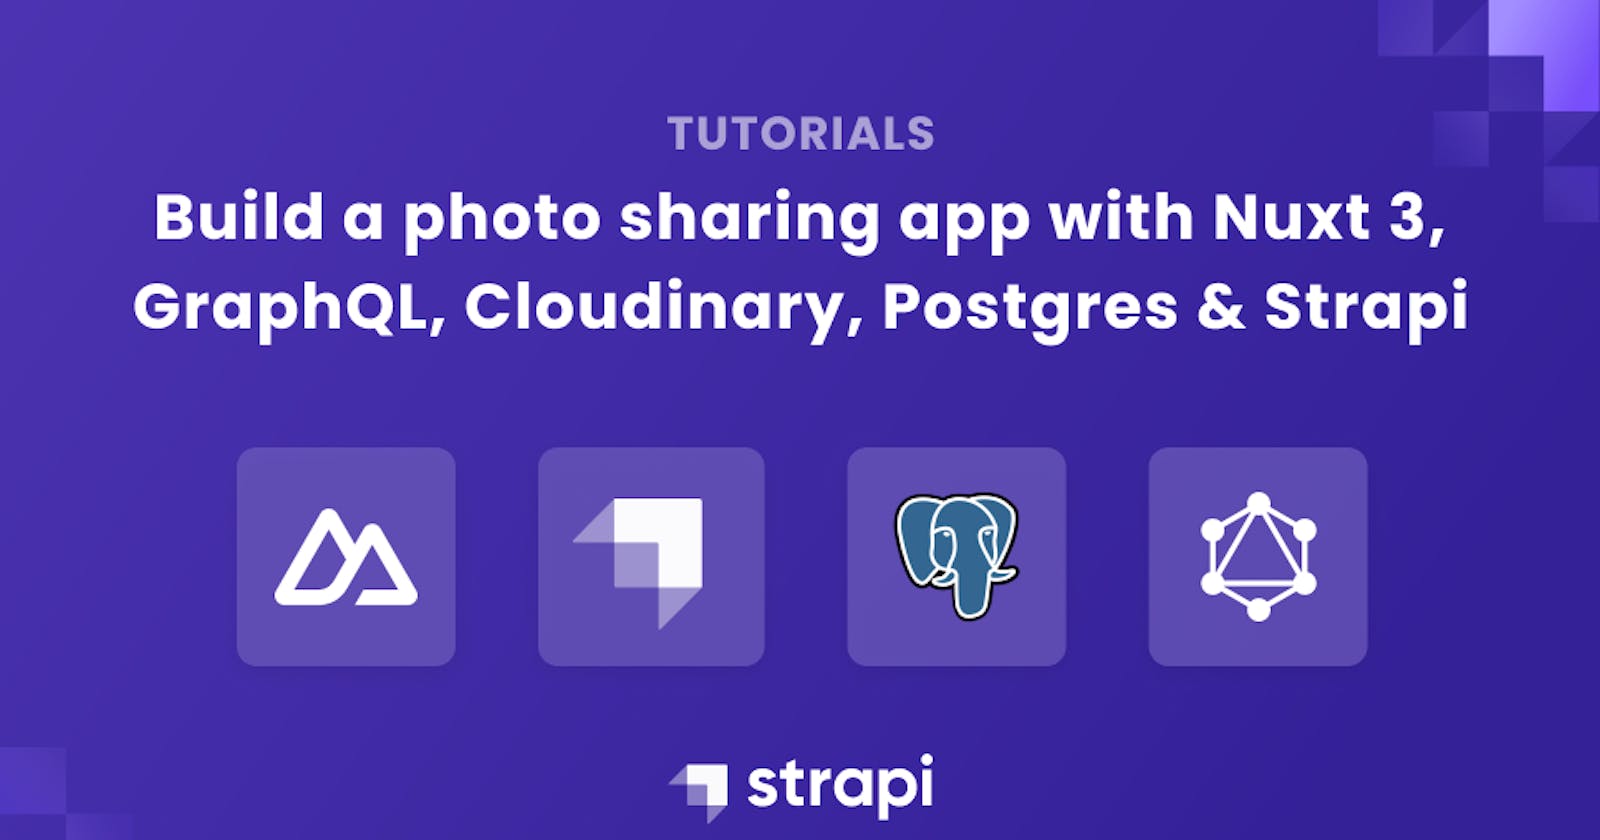 How to Build a Photo Sharing App with Nuxt 3, GraphQL, Cloudinary, Postgres and Strapi